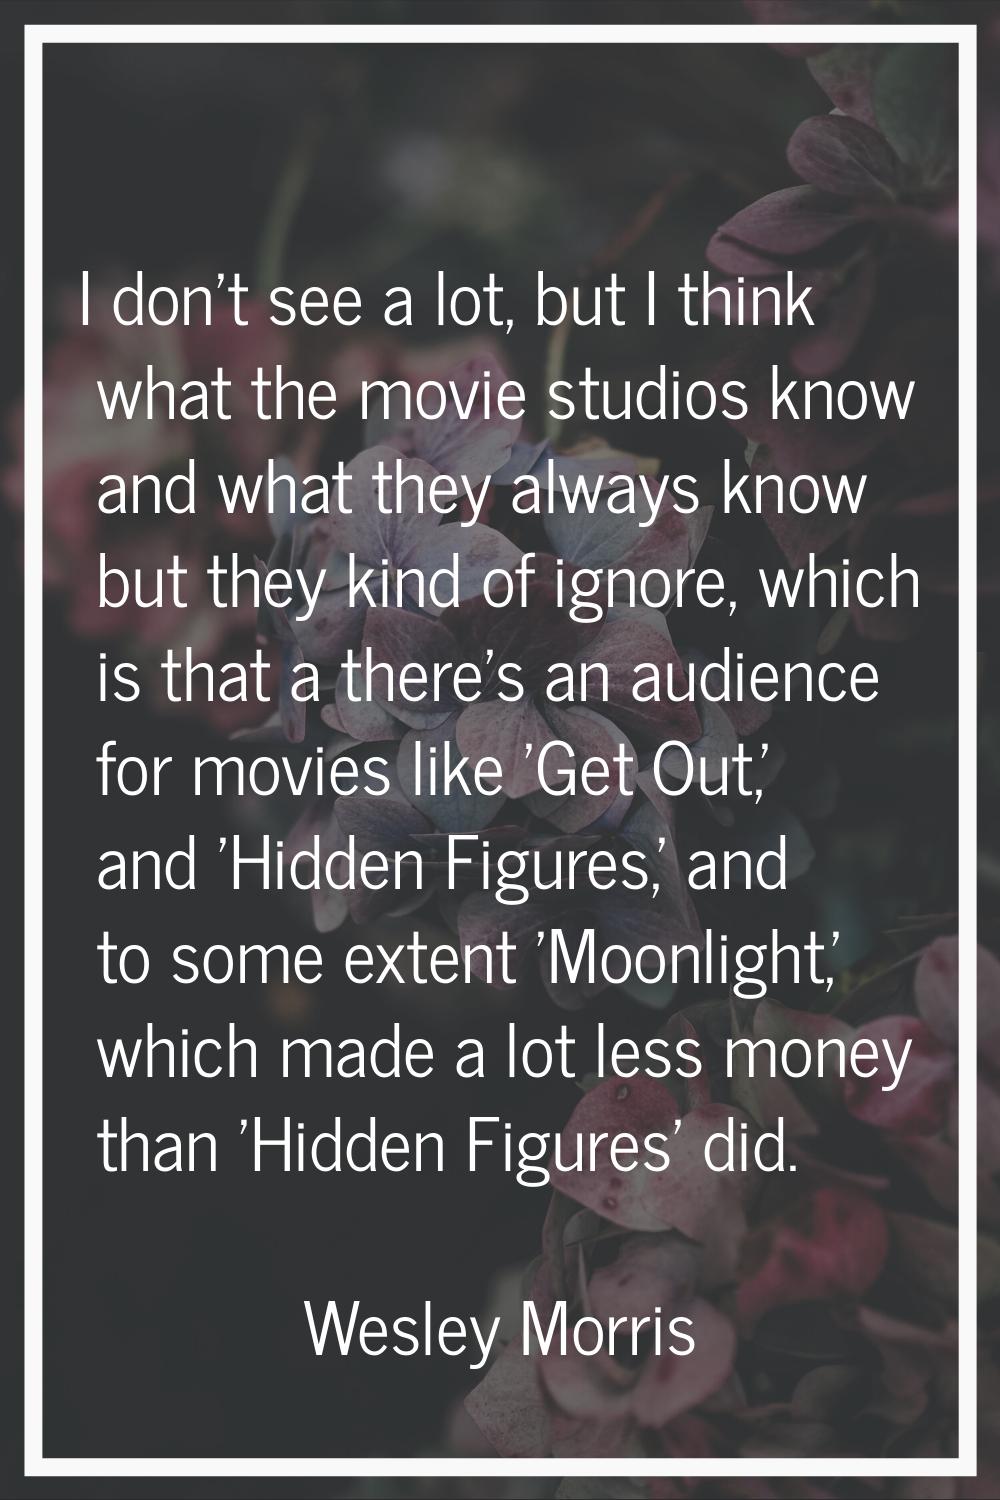 I don't see a lot, but I think what the movie studios know and what they always know but they kind 